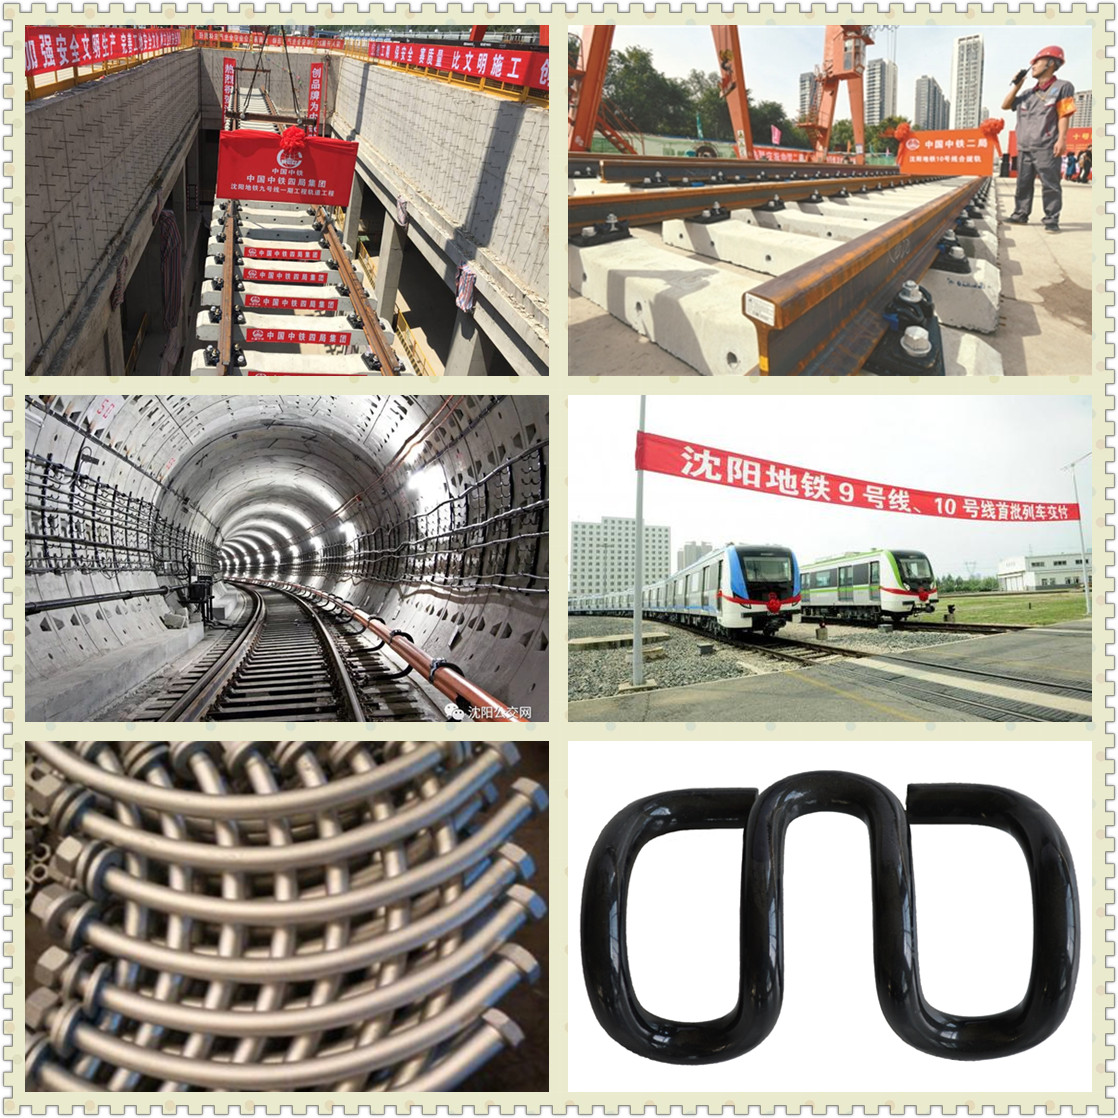 Anyang Railway Equipment Co., Ltd(AT) provided Rail Fastening Systems, Rail Clips, Tunnel Bolts for Shenyang Metro(Subway)